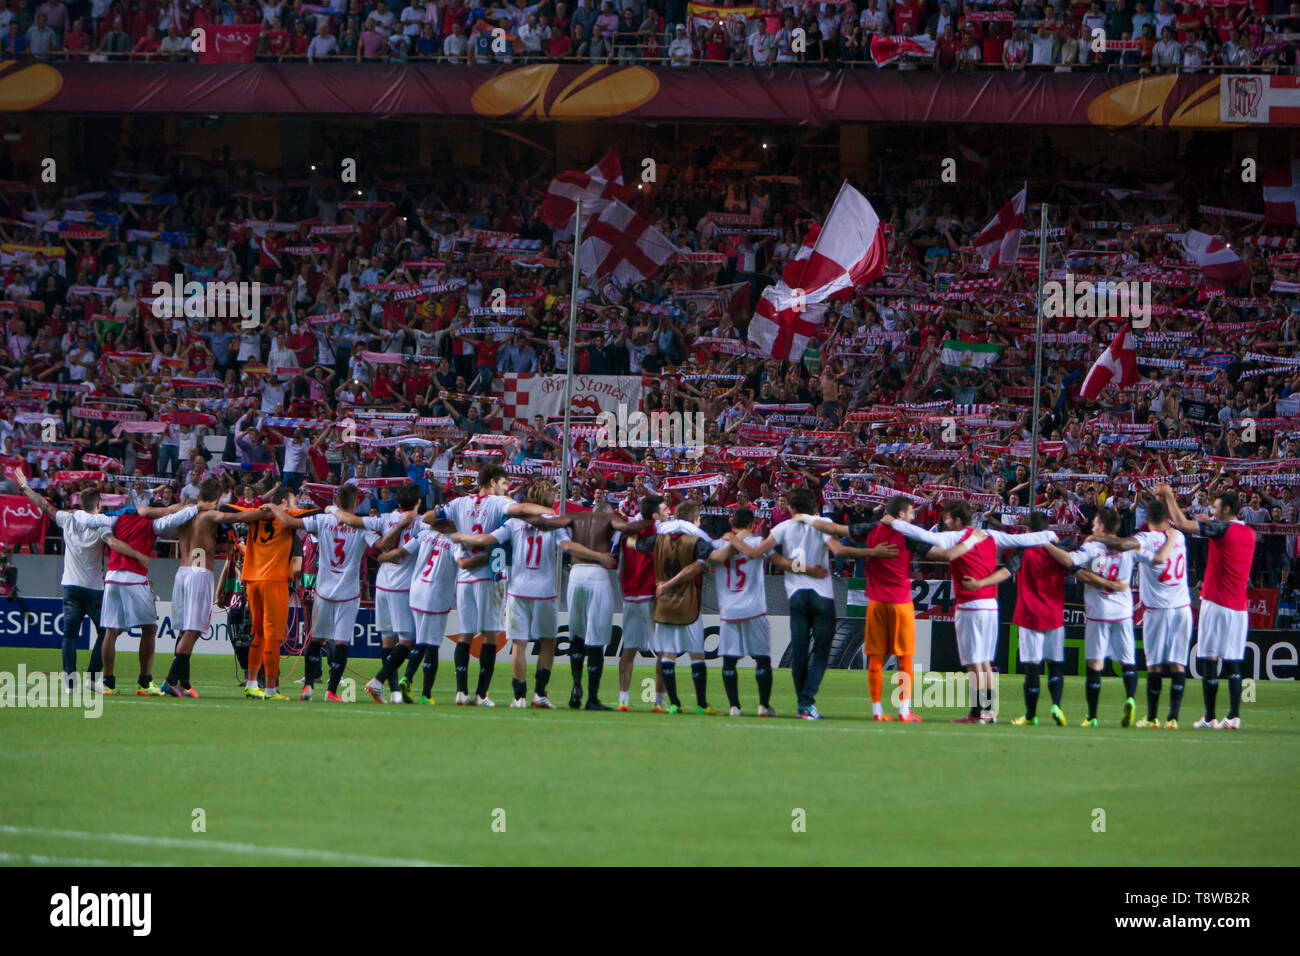 Players of Sevilla F.C. celebrate the victory at the end of the match of Europa League (quarterfinal 2nd leg) between Sevilla F.C. and F.C. Porto at the Ramon Sanchez Pizjuan Stadium on April 10, 2014 in Seville, Spain Stock Photo